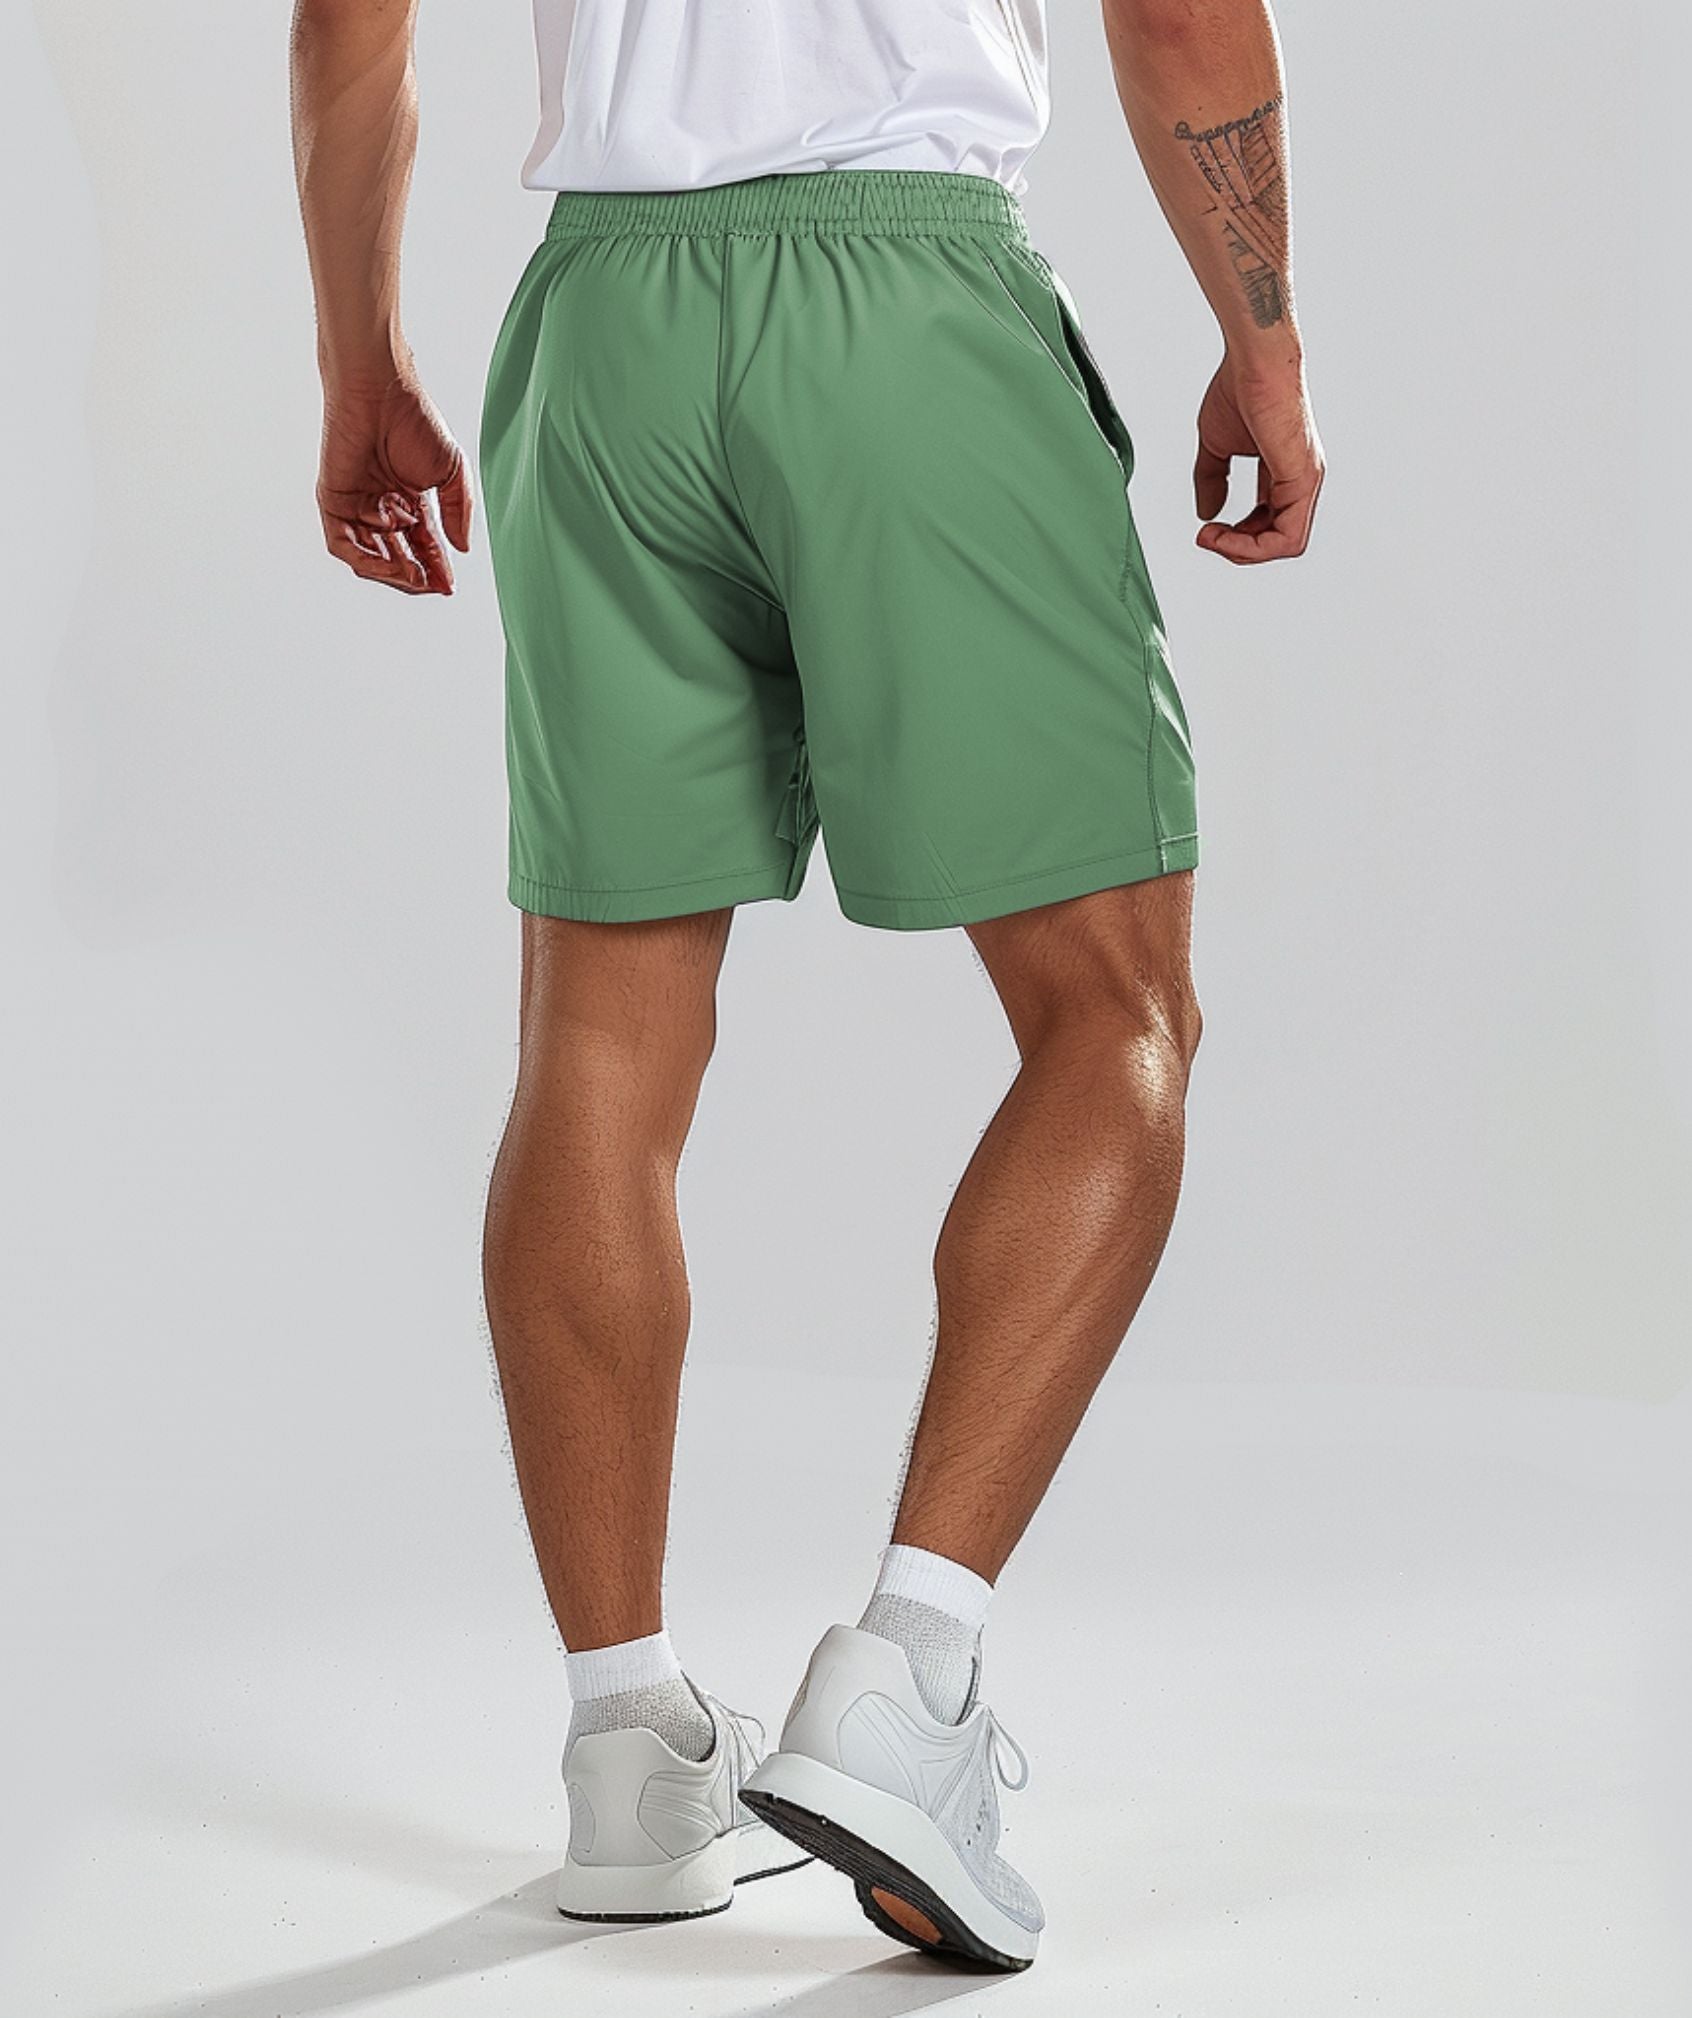 Apex™ green Pinnacle Shorts back view - sustainable activewear